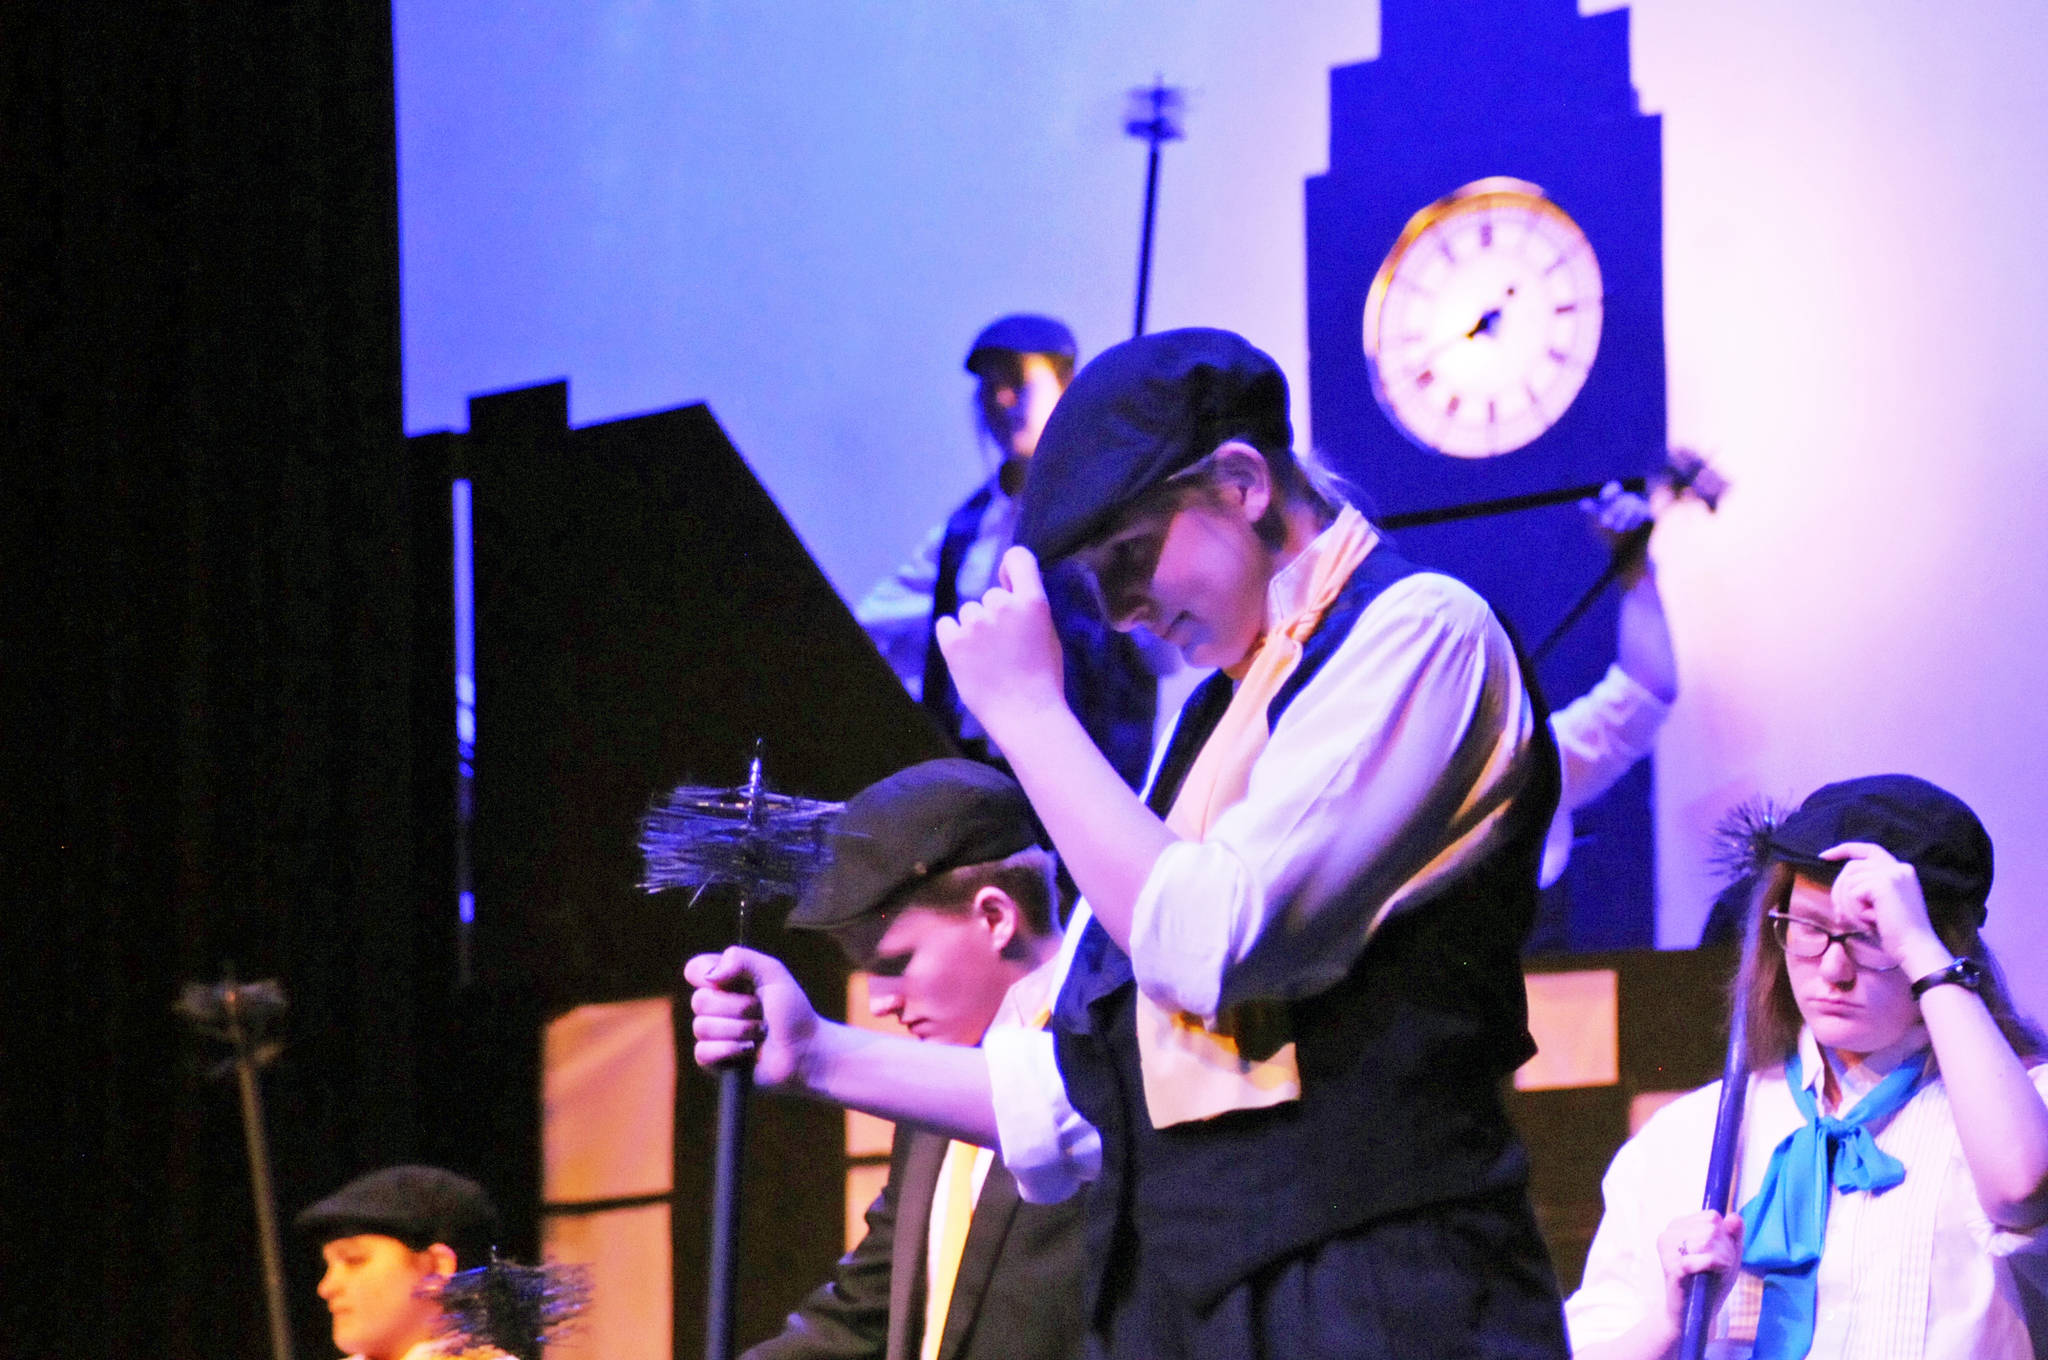 Student actors prepare for a tap-dancing scene during a dress rehearsal for Nikiski Middle-High School’s production of “Mary Poppins” on Monday, April 23, 2018 in Nikiski, Alaska. The play premiers Friday at 7 p.m. at the high school. Tickets are $15. (Photo by Elizabeth Earl/Peninsula Clarion)